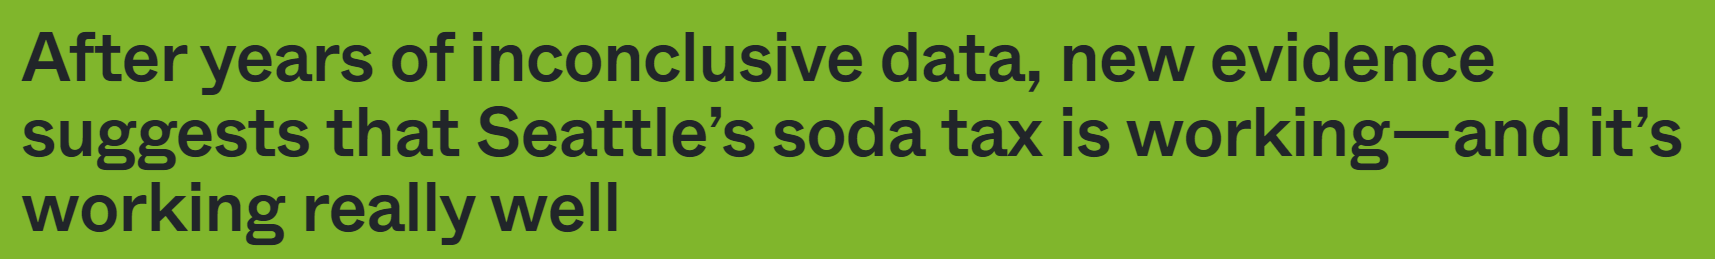 After years of inconclusive data, new evidence suggests that Seattle’s soda tax is working—and it’s working really well (thecounter.org)